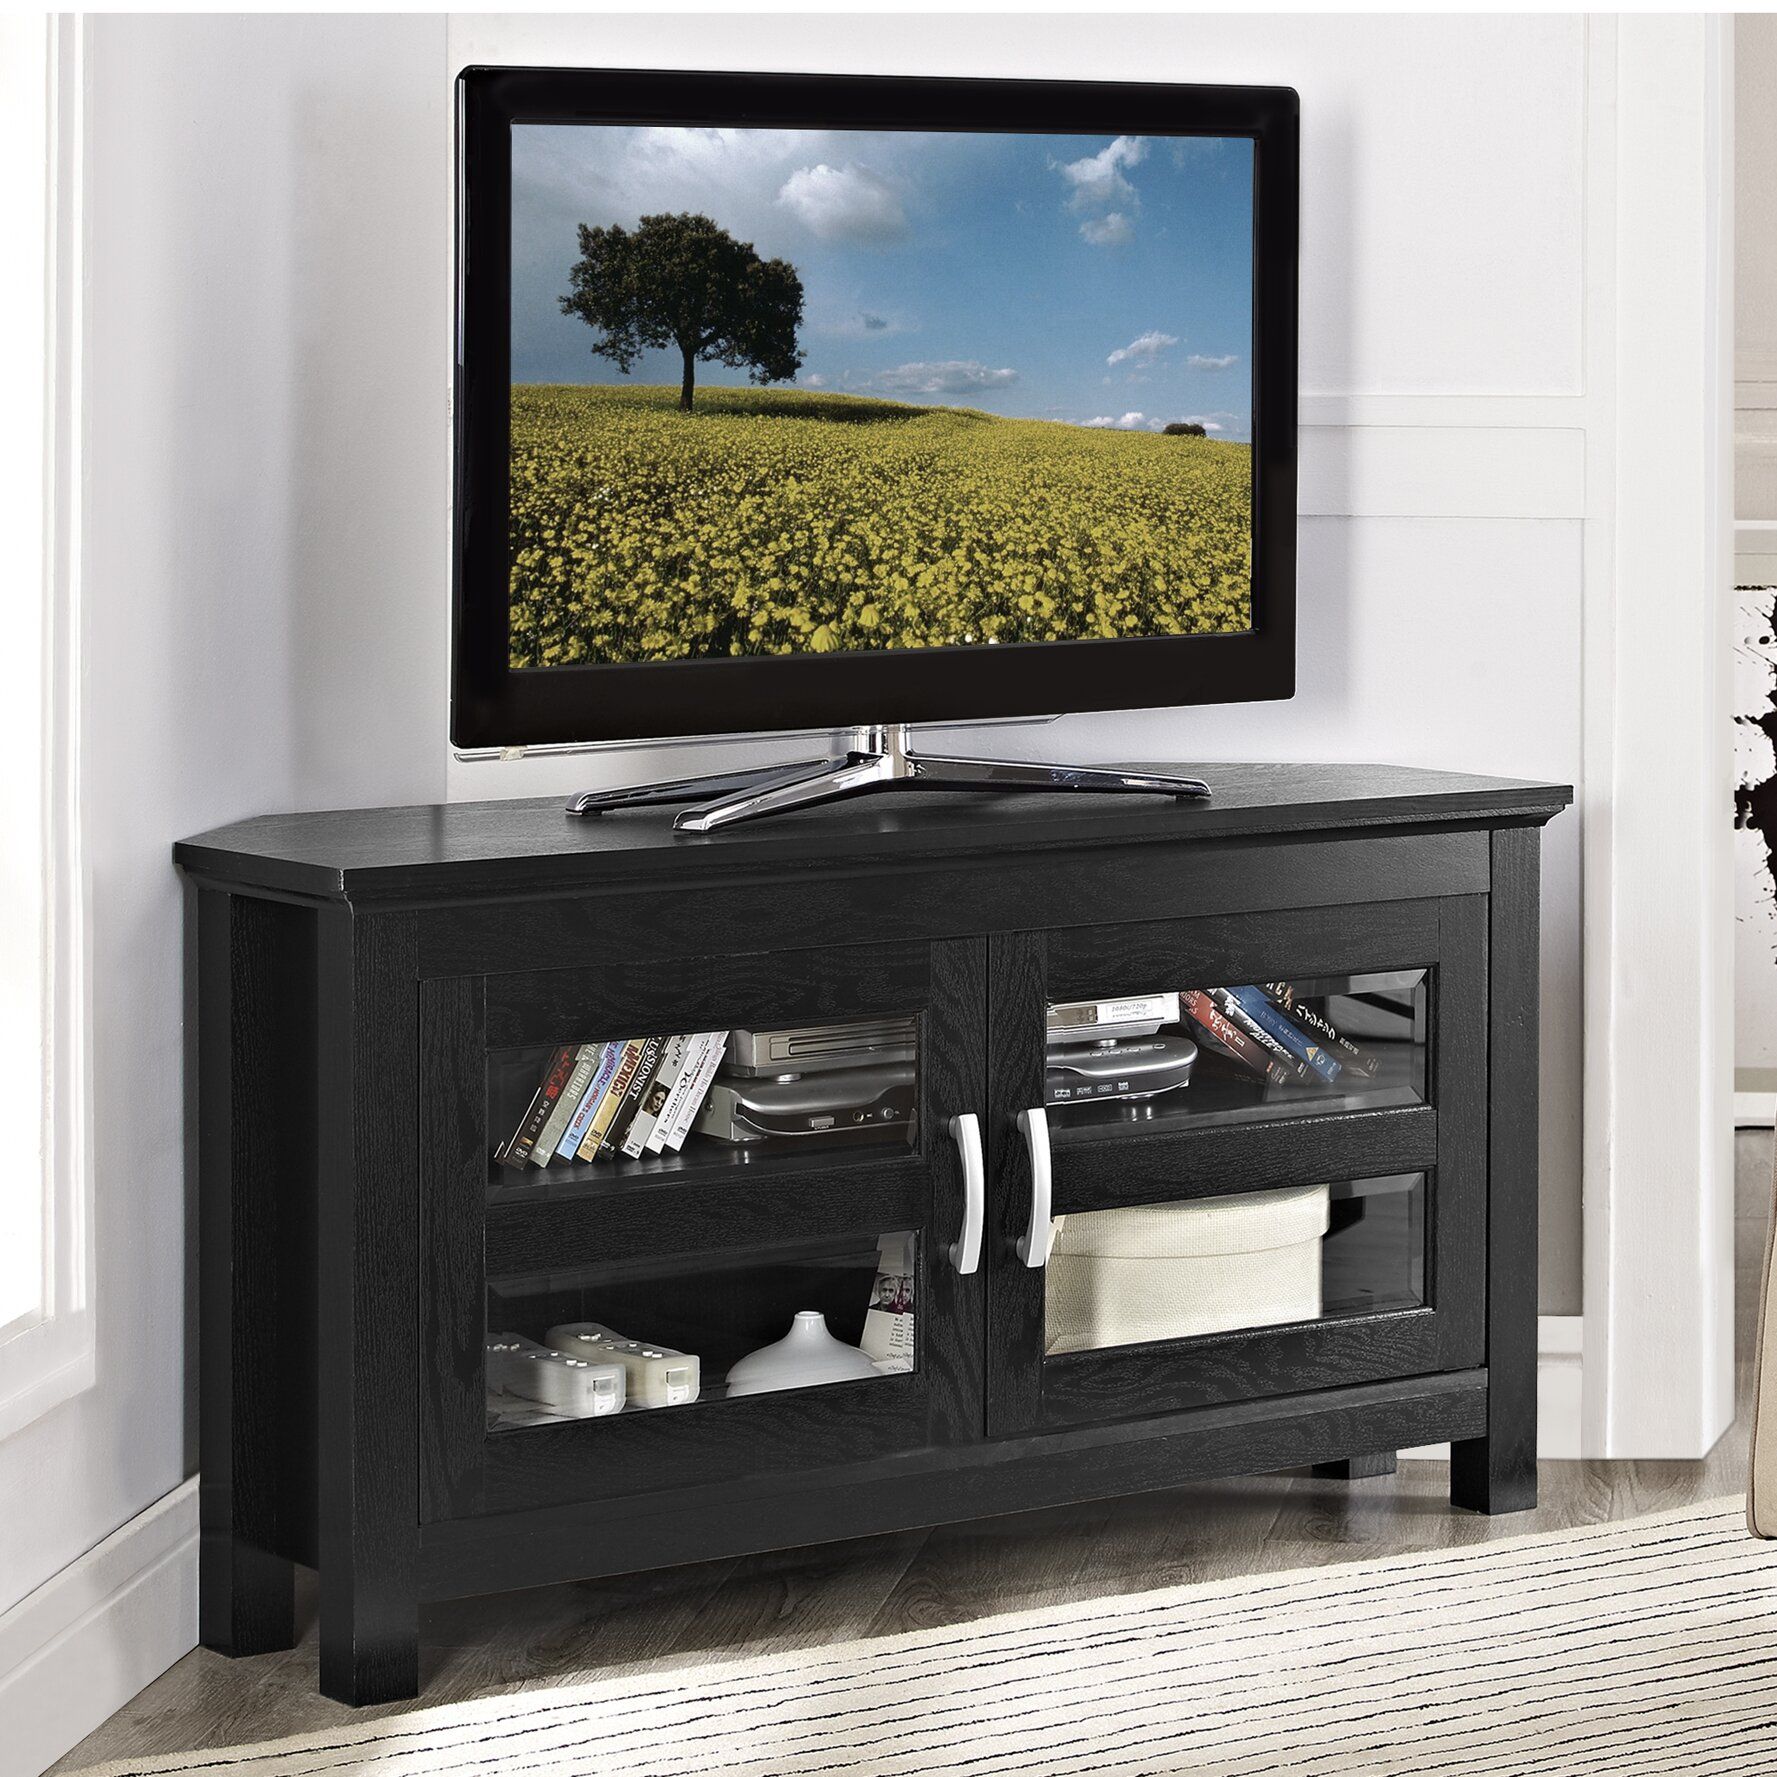 Alcott Hill Sulyard Wood Corner Tv Stand & Reviews | Wayfair Throughout Hex Corner Tv Stands (View 3 of 15)